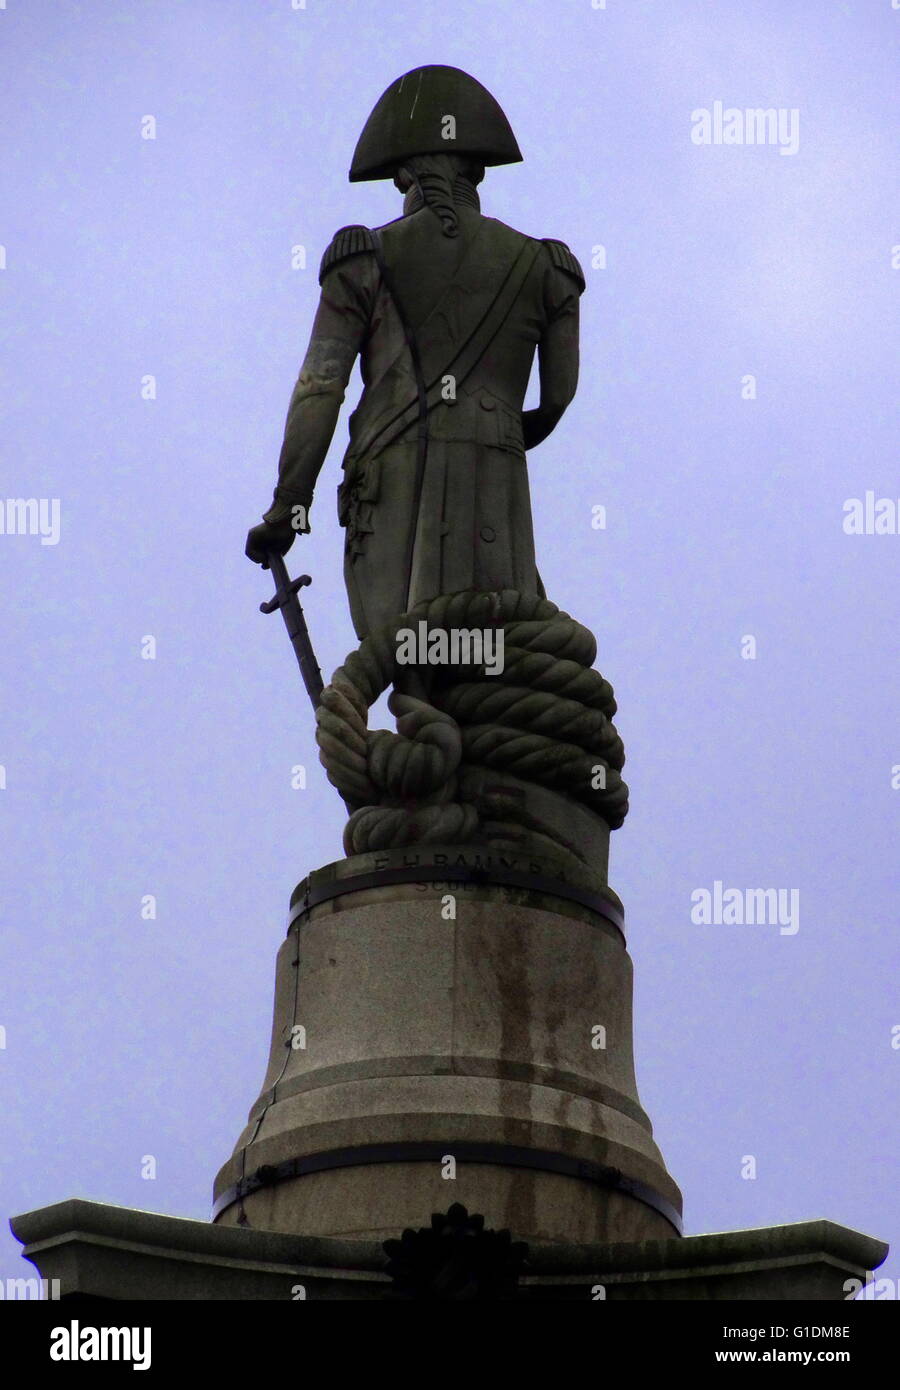 Nelson's Column, a monument in Trafalgar Square, London. Dated 21st Century Stock Photo